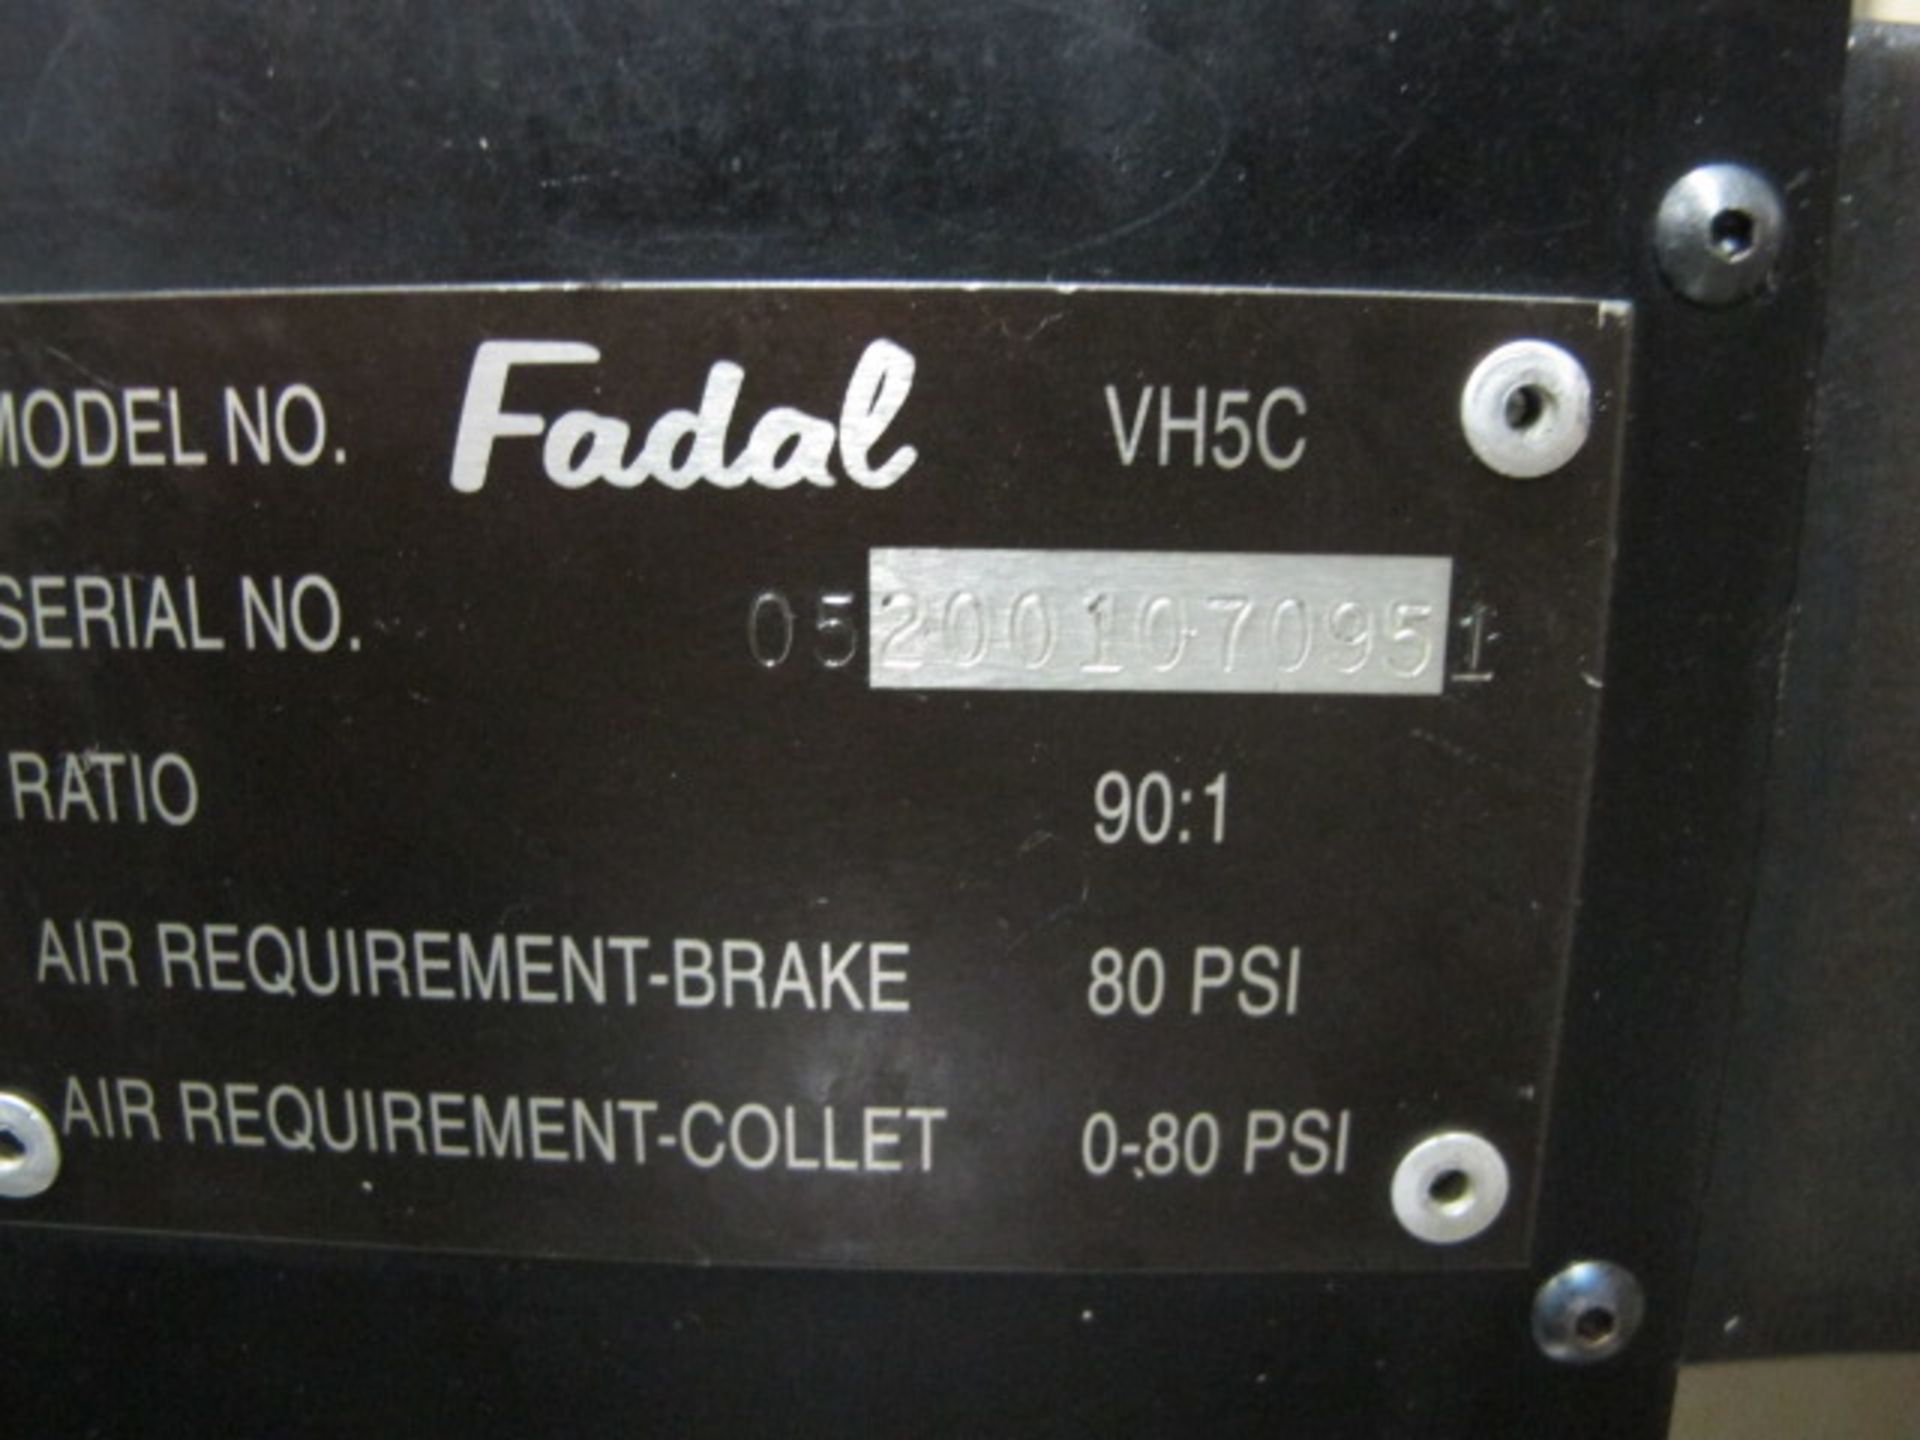 Fadal mdl. VH5C 4th Axis 5C Rotary Head s/n 052001070951 w/ Mill Center - Image 5 of 5